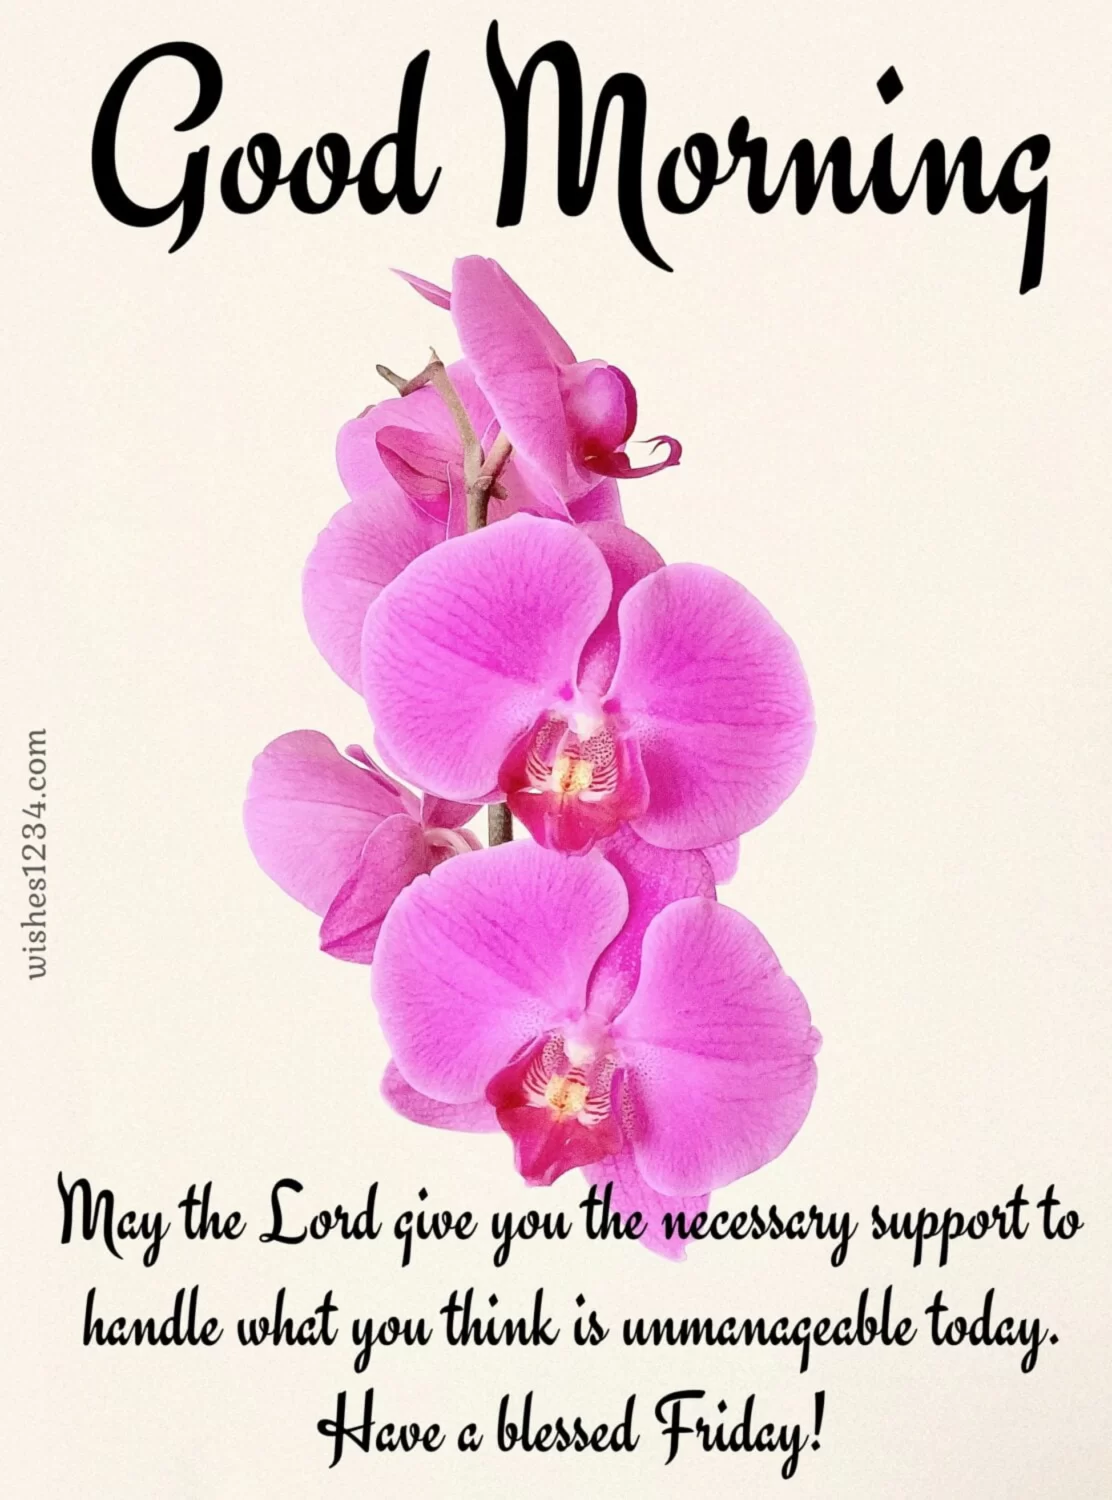 Morning quote with Pink Orchid, Friday Morning wishes.